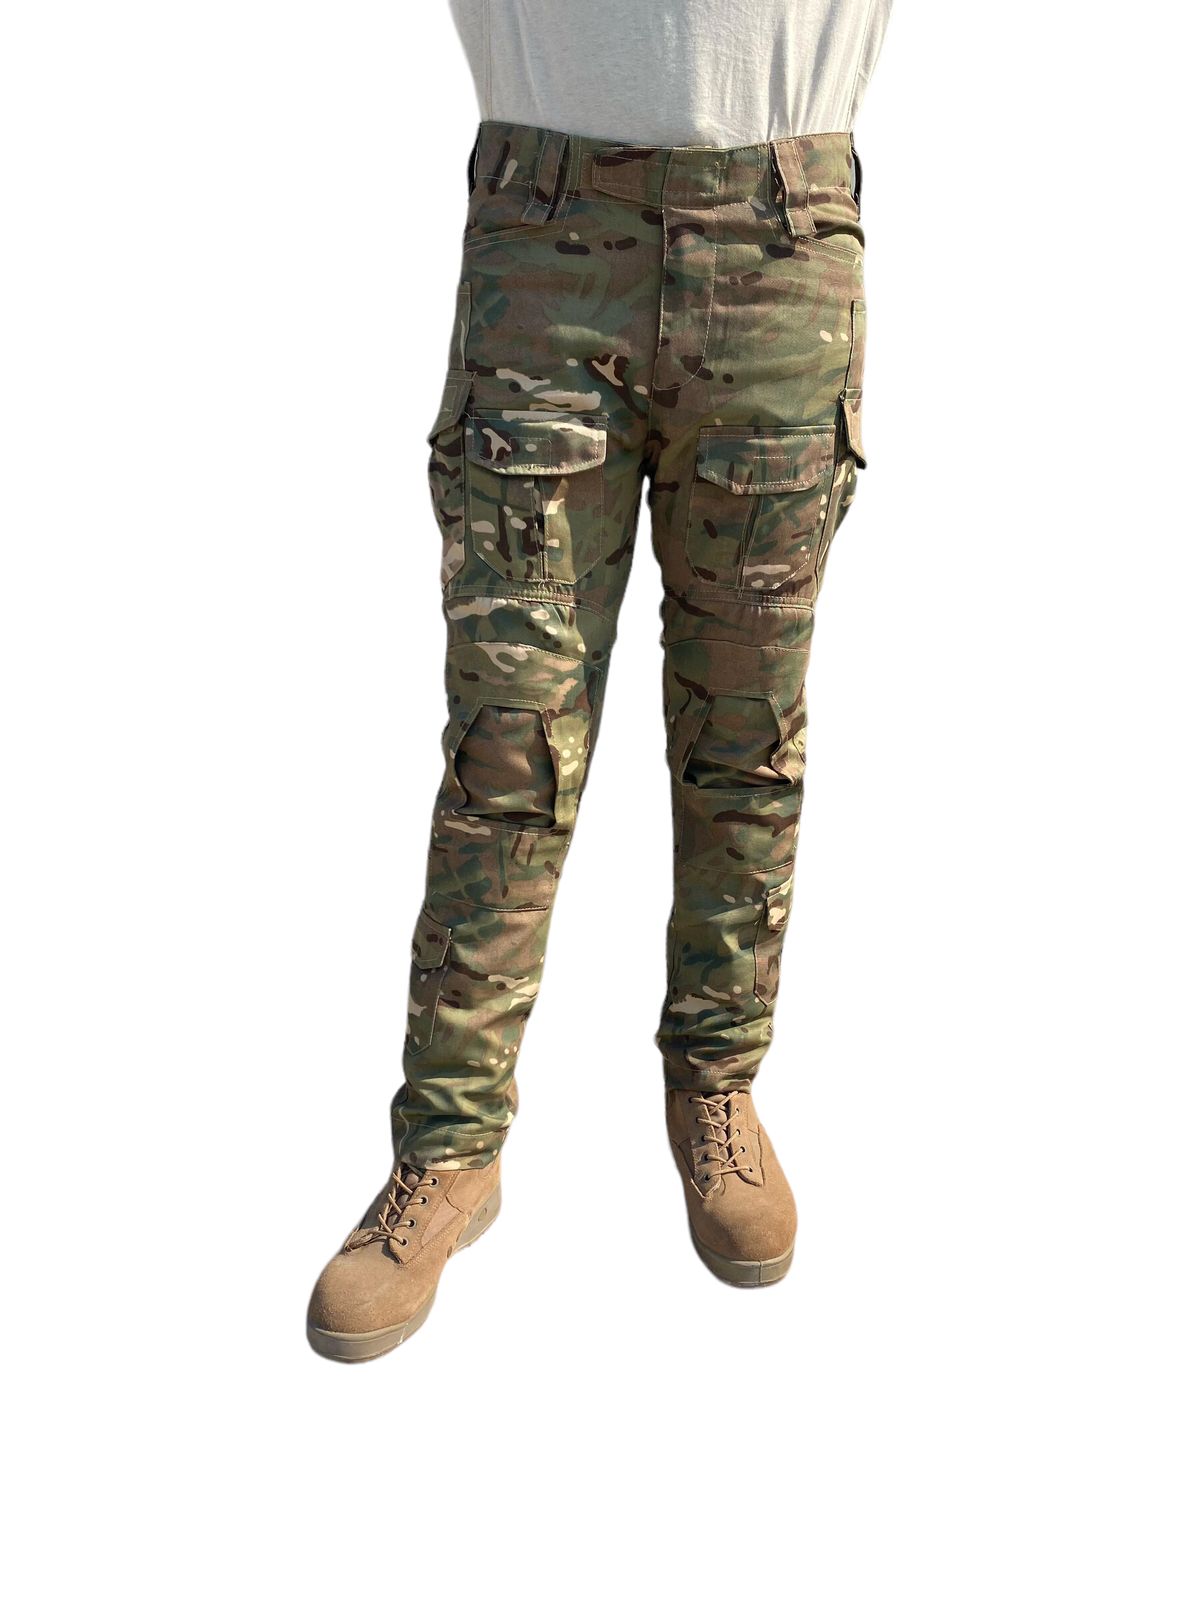 Specter Defense ELITE G3 All Weather MULTICAM TACTICAL PANT with KNEE PADS